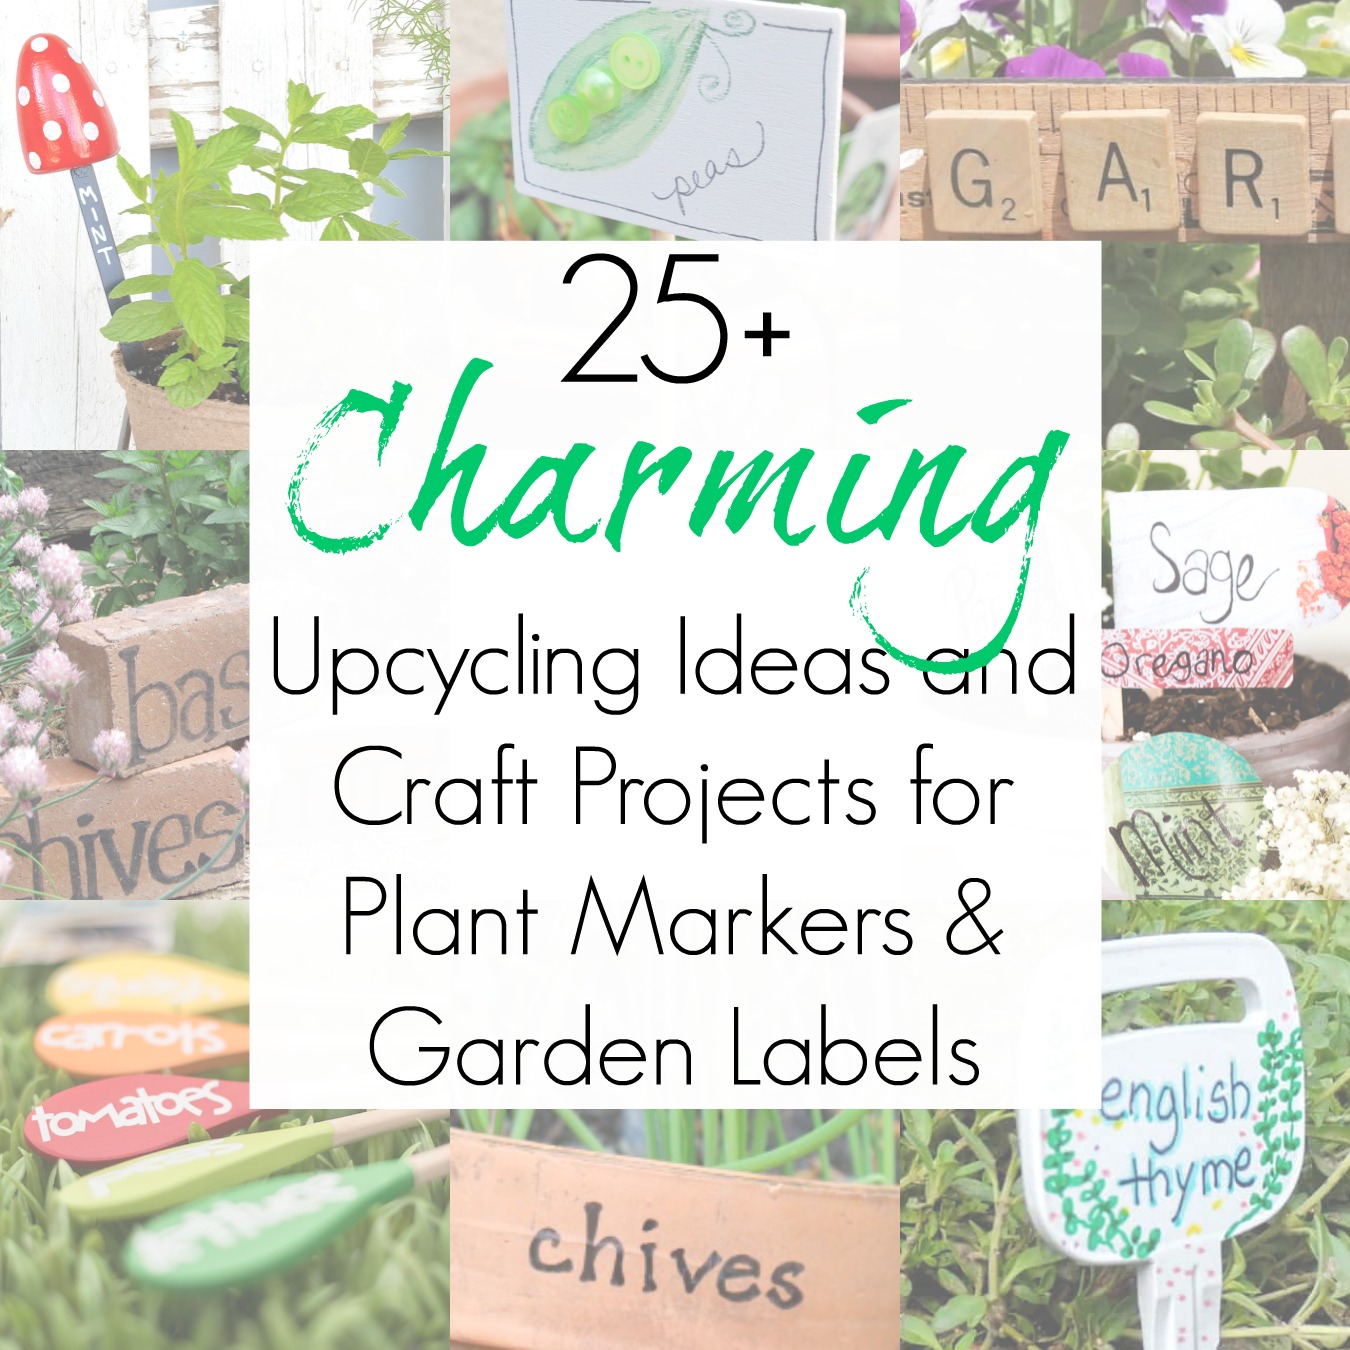 25+ Upcycling Crafts for Garden Markers or Plant Labels